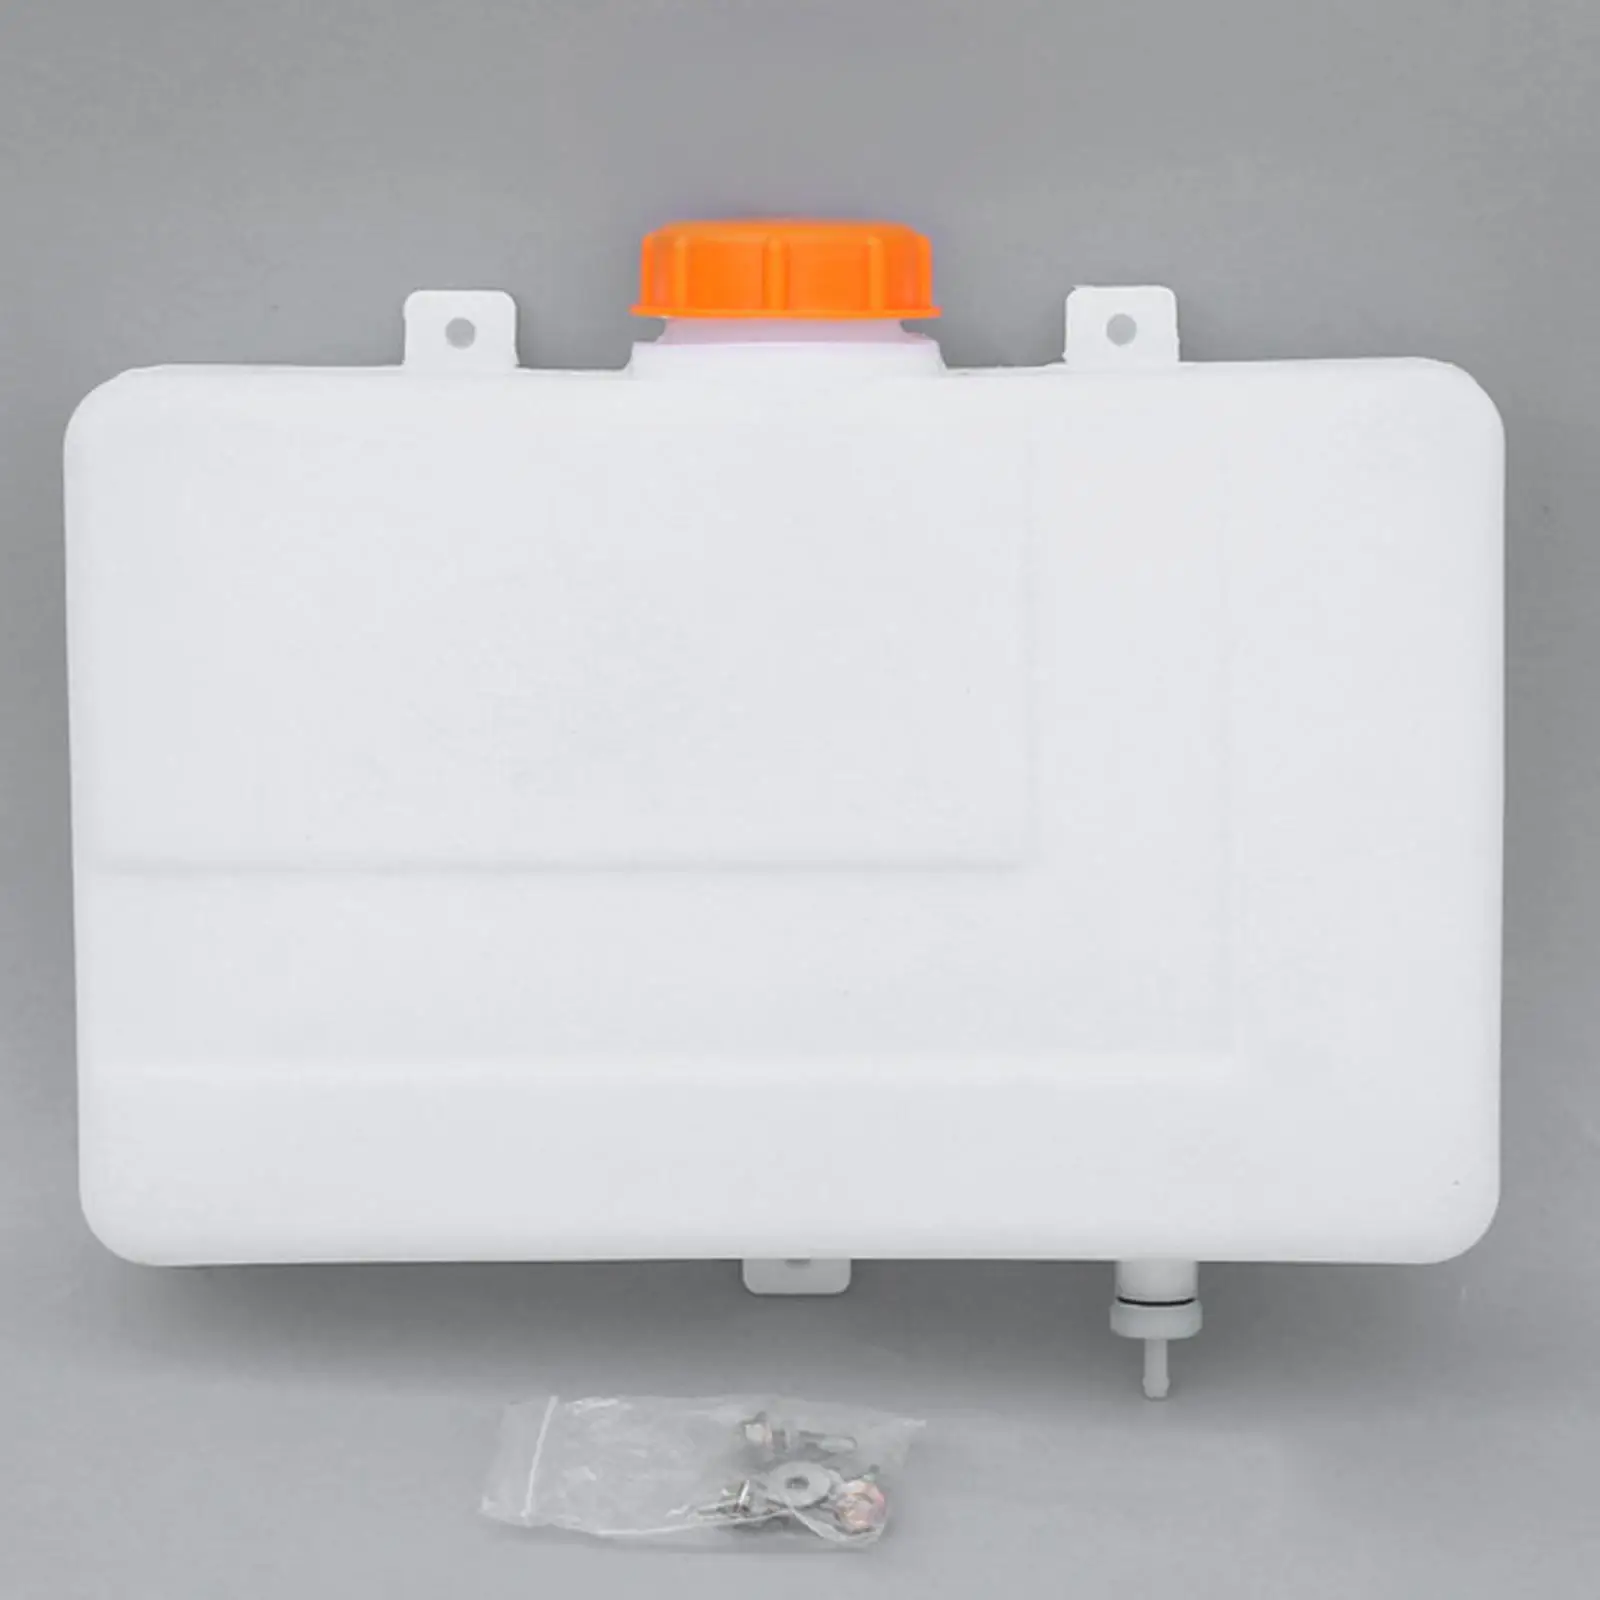 Gasoline Fuel Oil Tank 7L  Fits for Motorcycle Carry Other Liquids